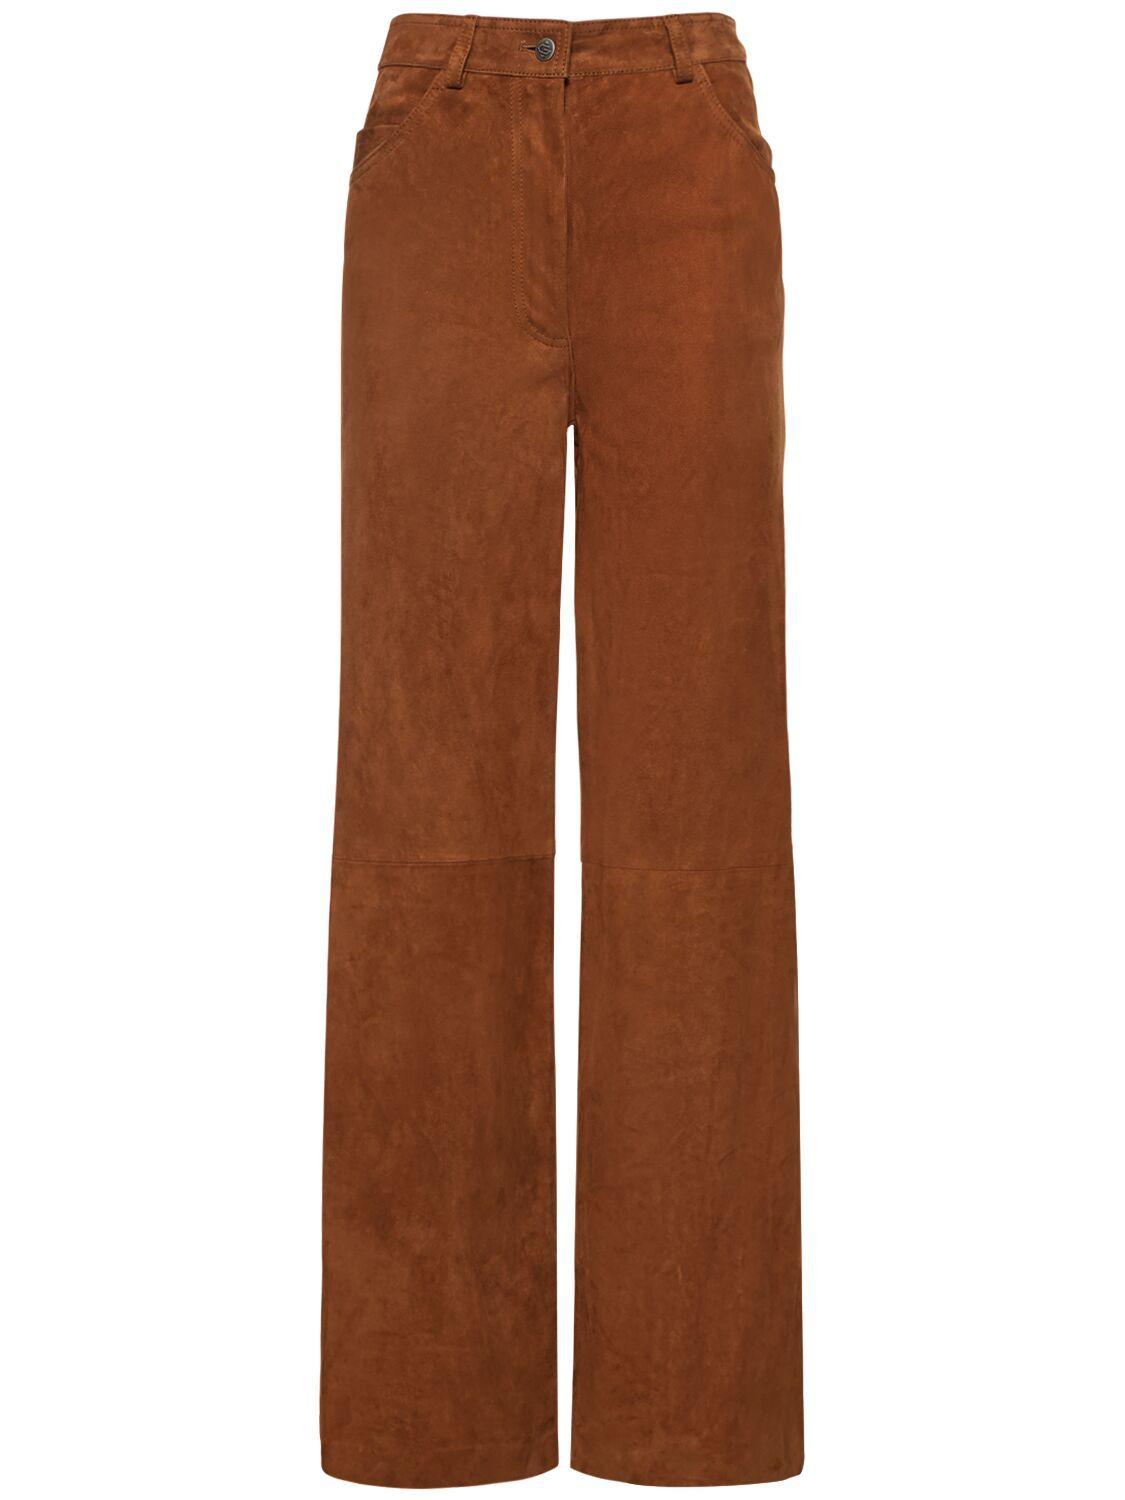 GIUSEPPE DI MORABITO Suede Leather Pants in Brown | Lyst